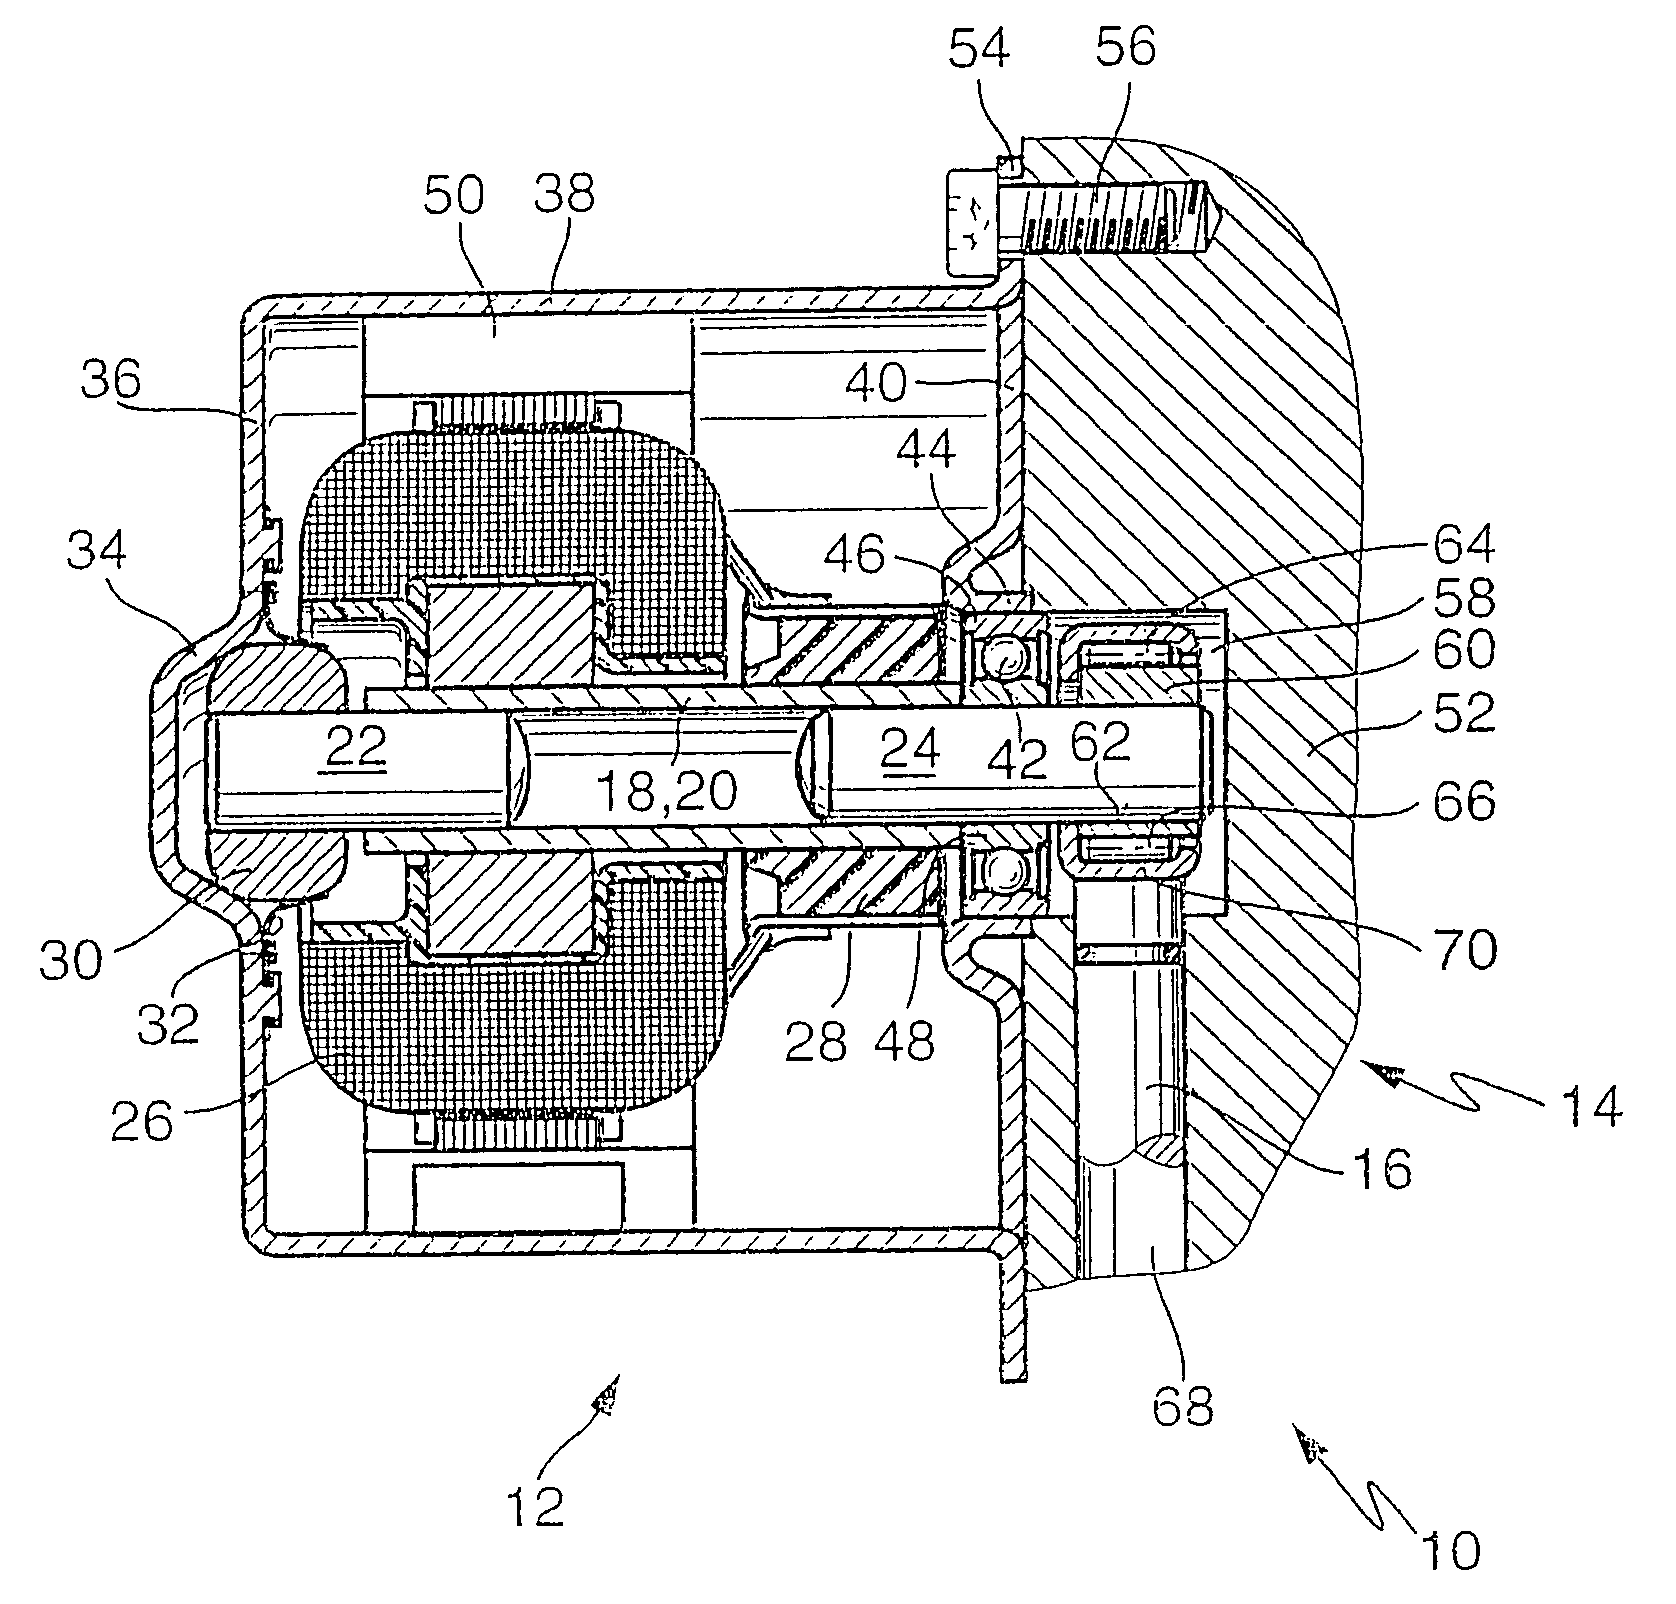 Pump aggregate for a hydraulic vehicle braking system